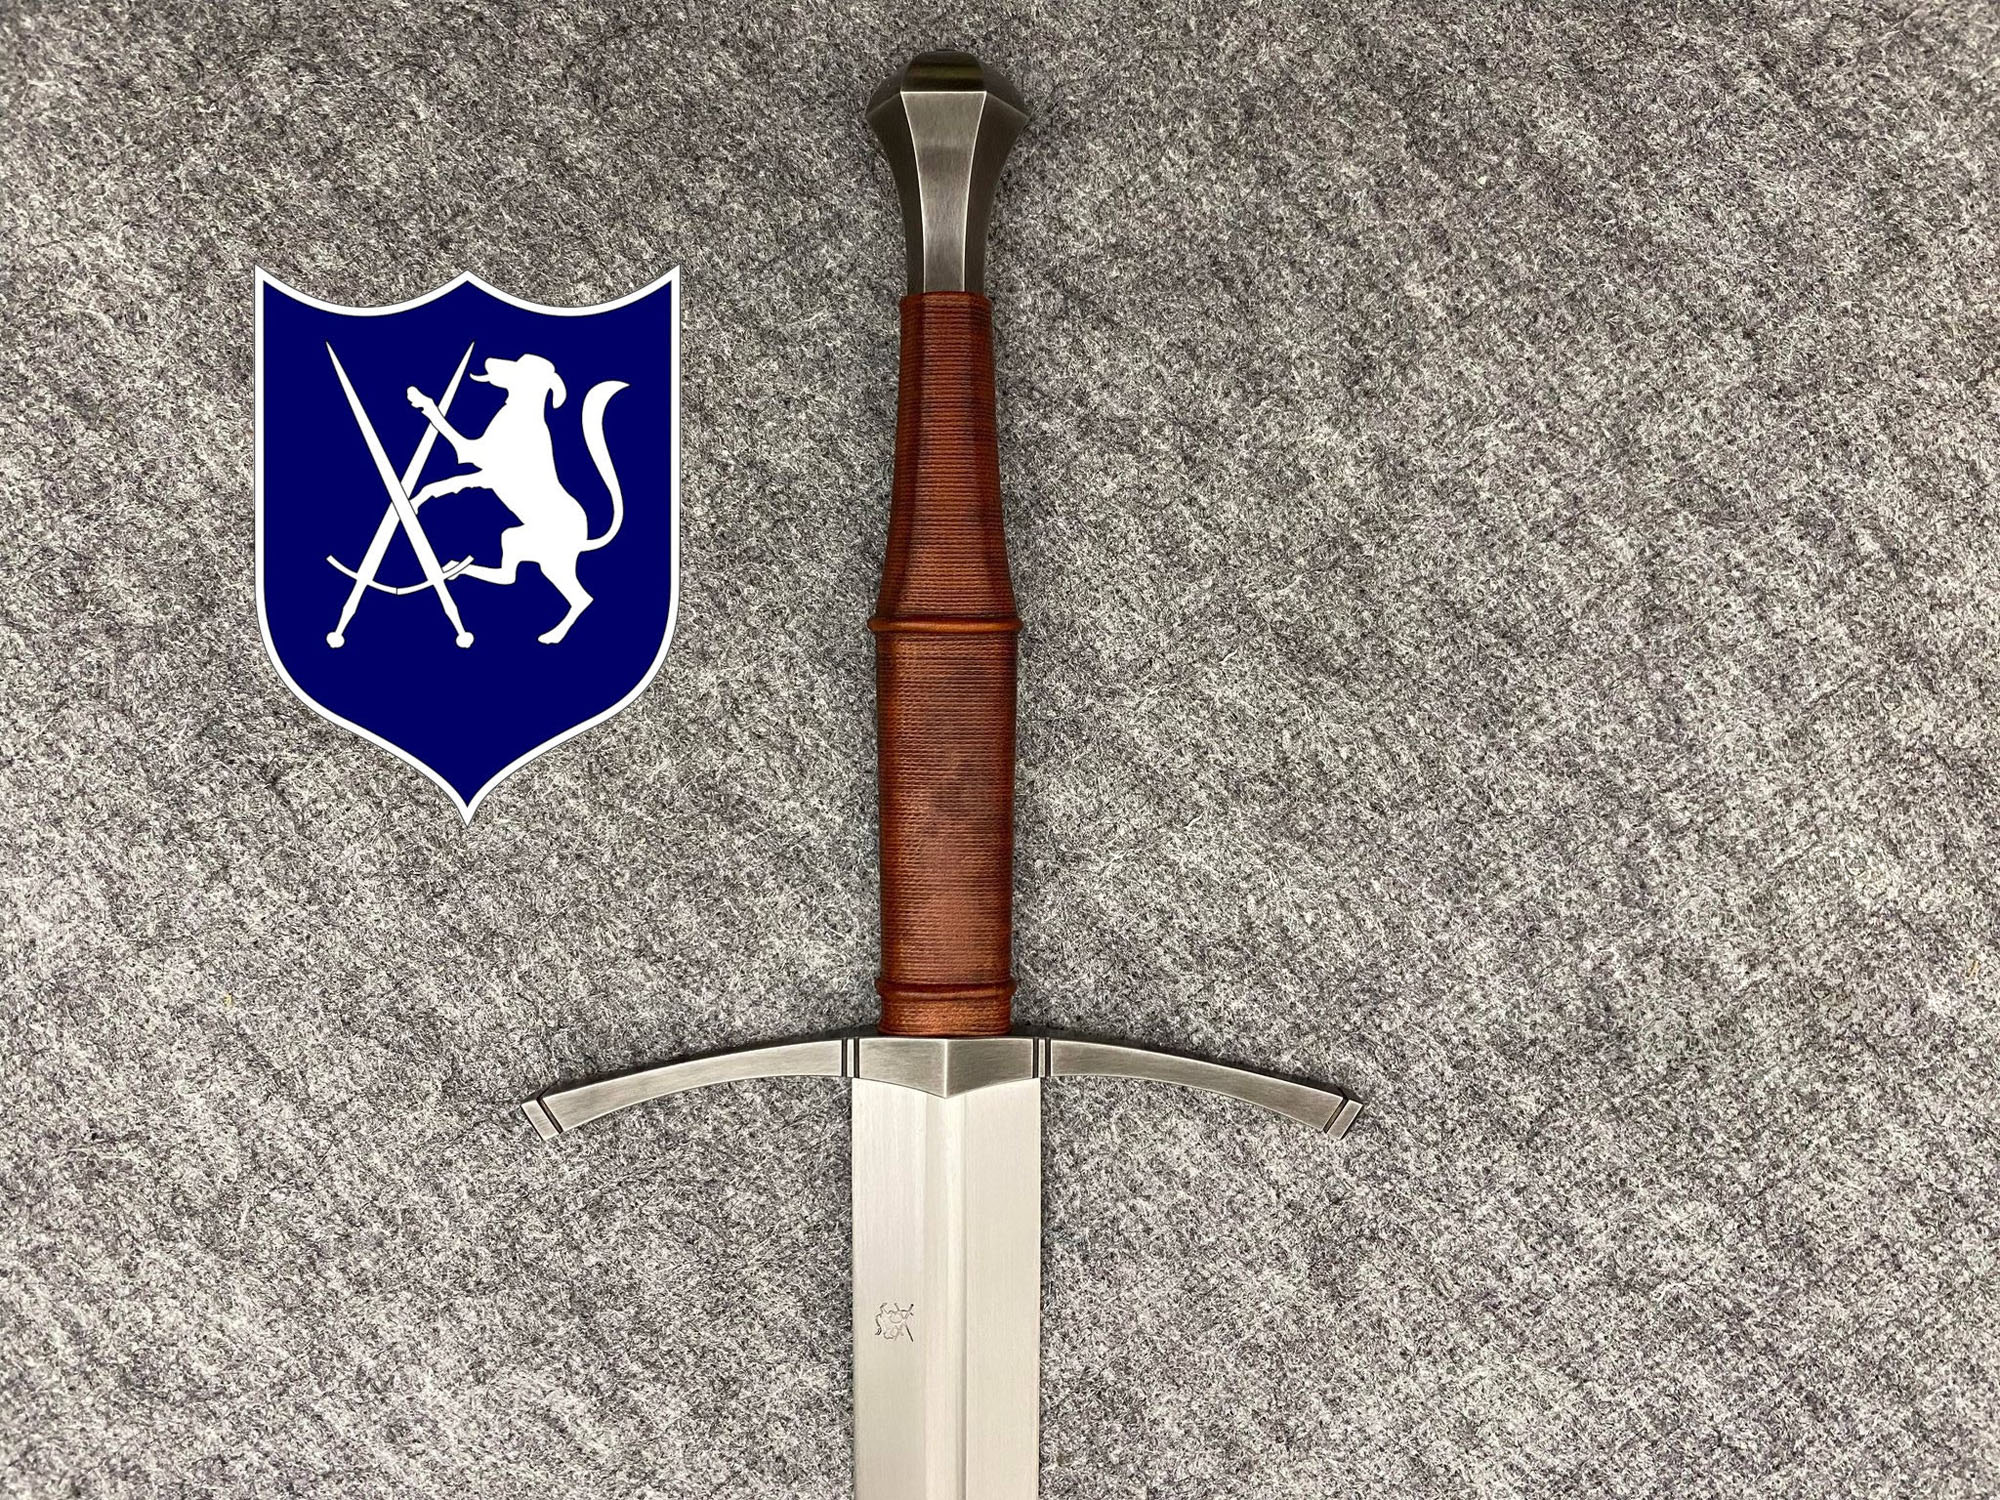 The Ansbach Sword, handforged and sharp blade